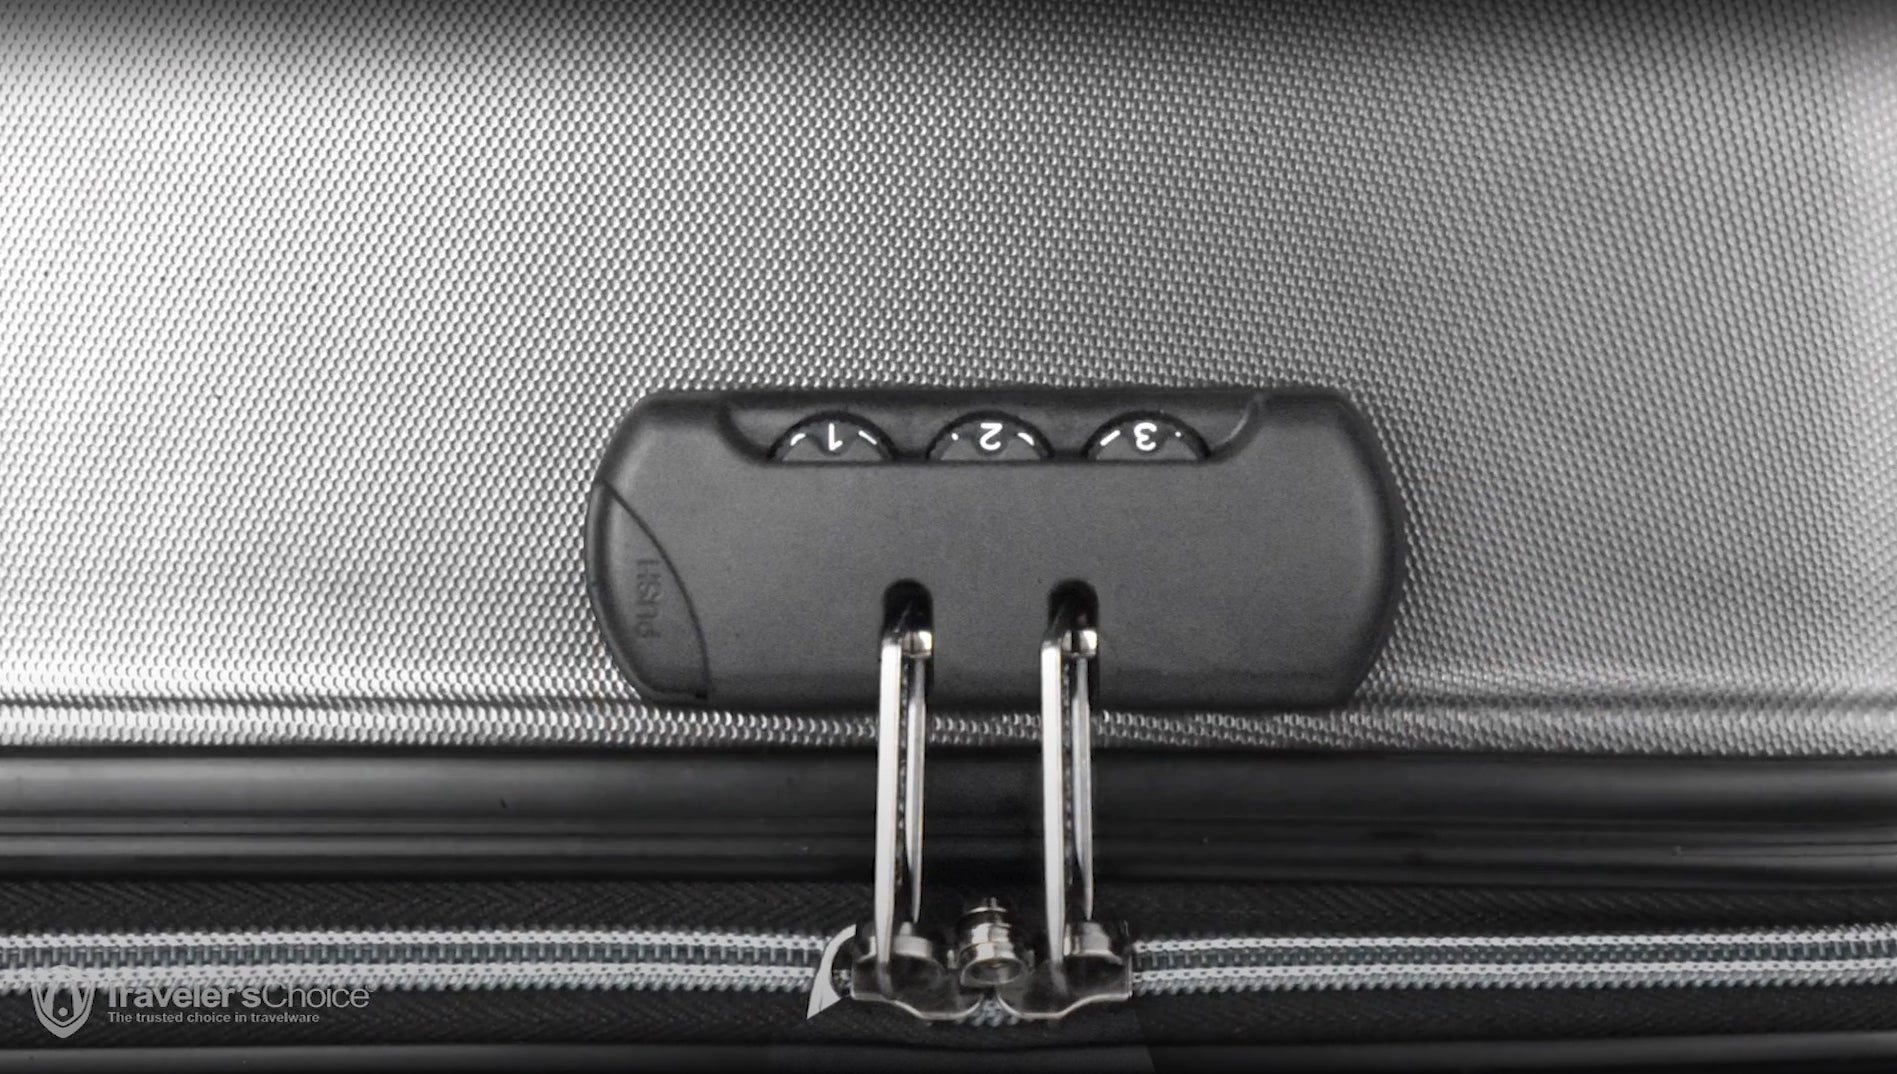 How to Open a Locked Suitcase Trunk Without the Key